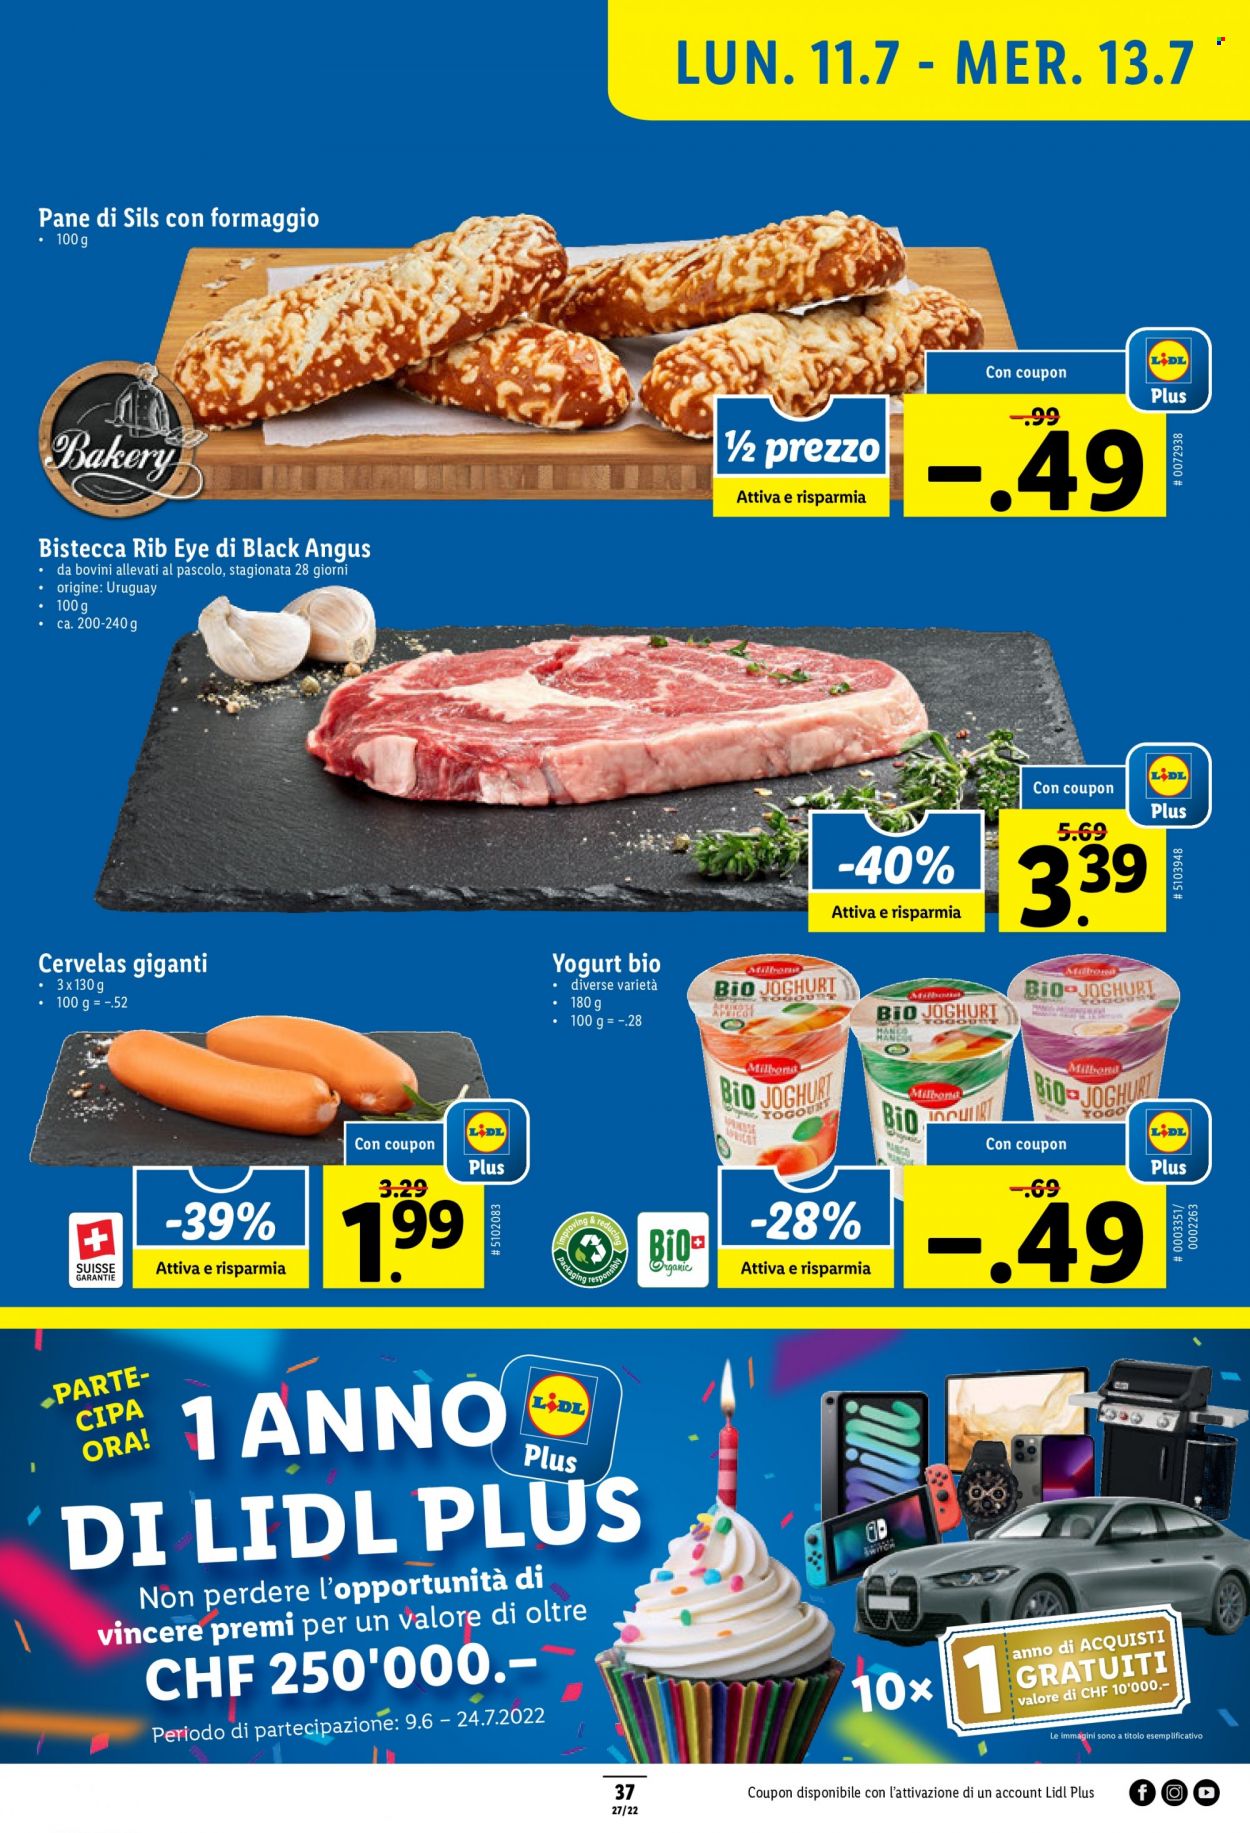 Catalogue Lidl - 7.7.2022 - 13.7.2022. Page 37.